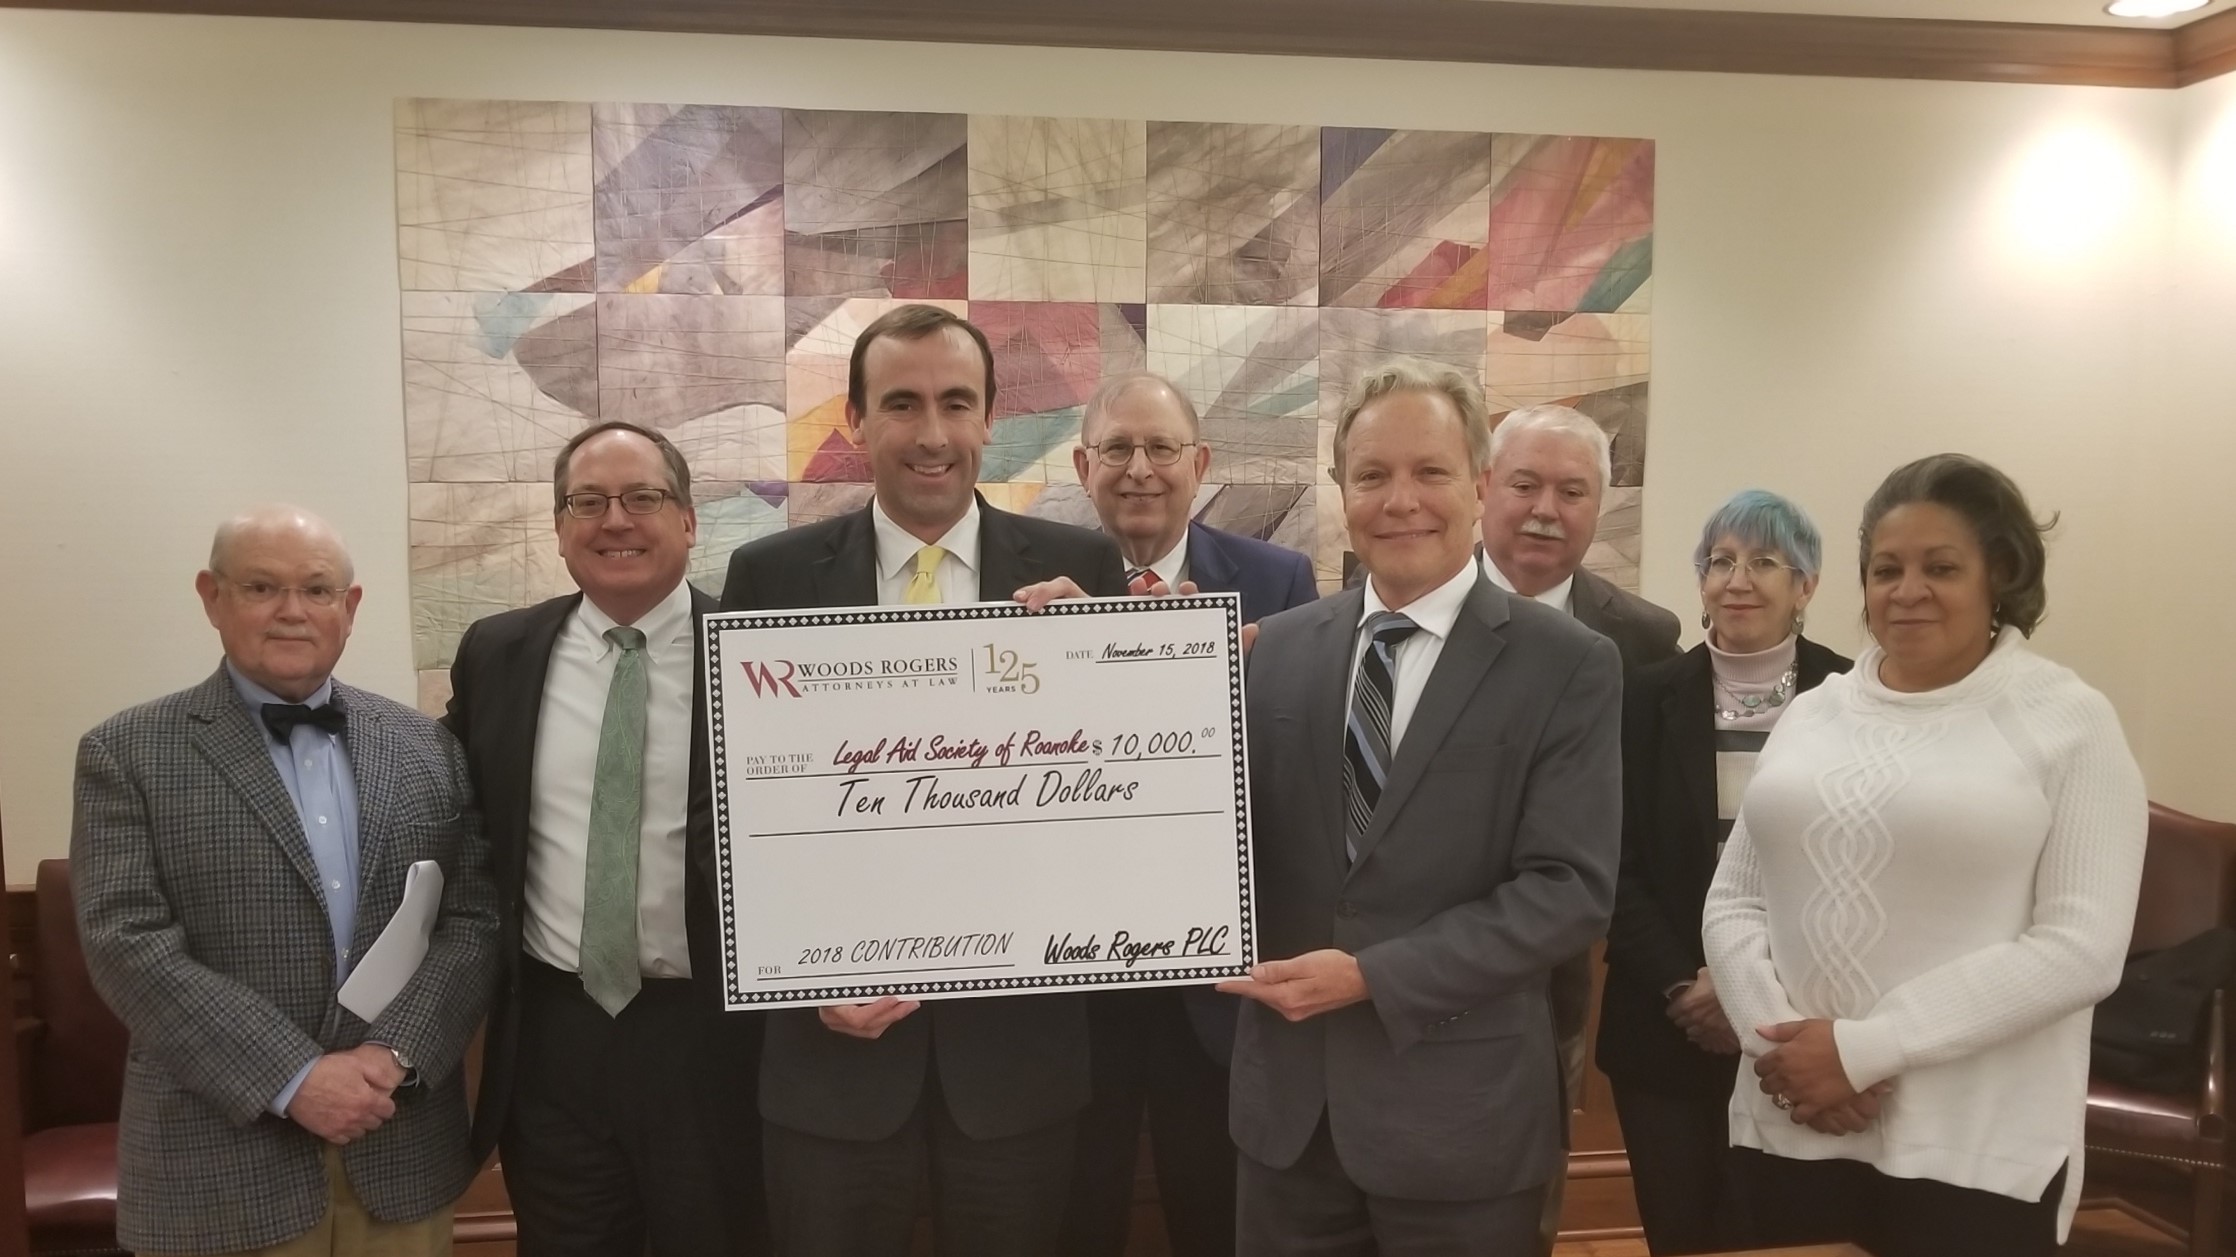 Woods Rogers President Dan Summerlin presents David Beidler and the Board of Directors of the Legal Aid Society of Roanoke Valley with a $10,000 contribution.